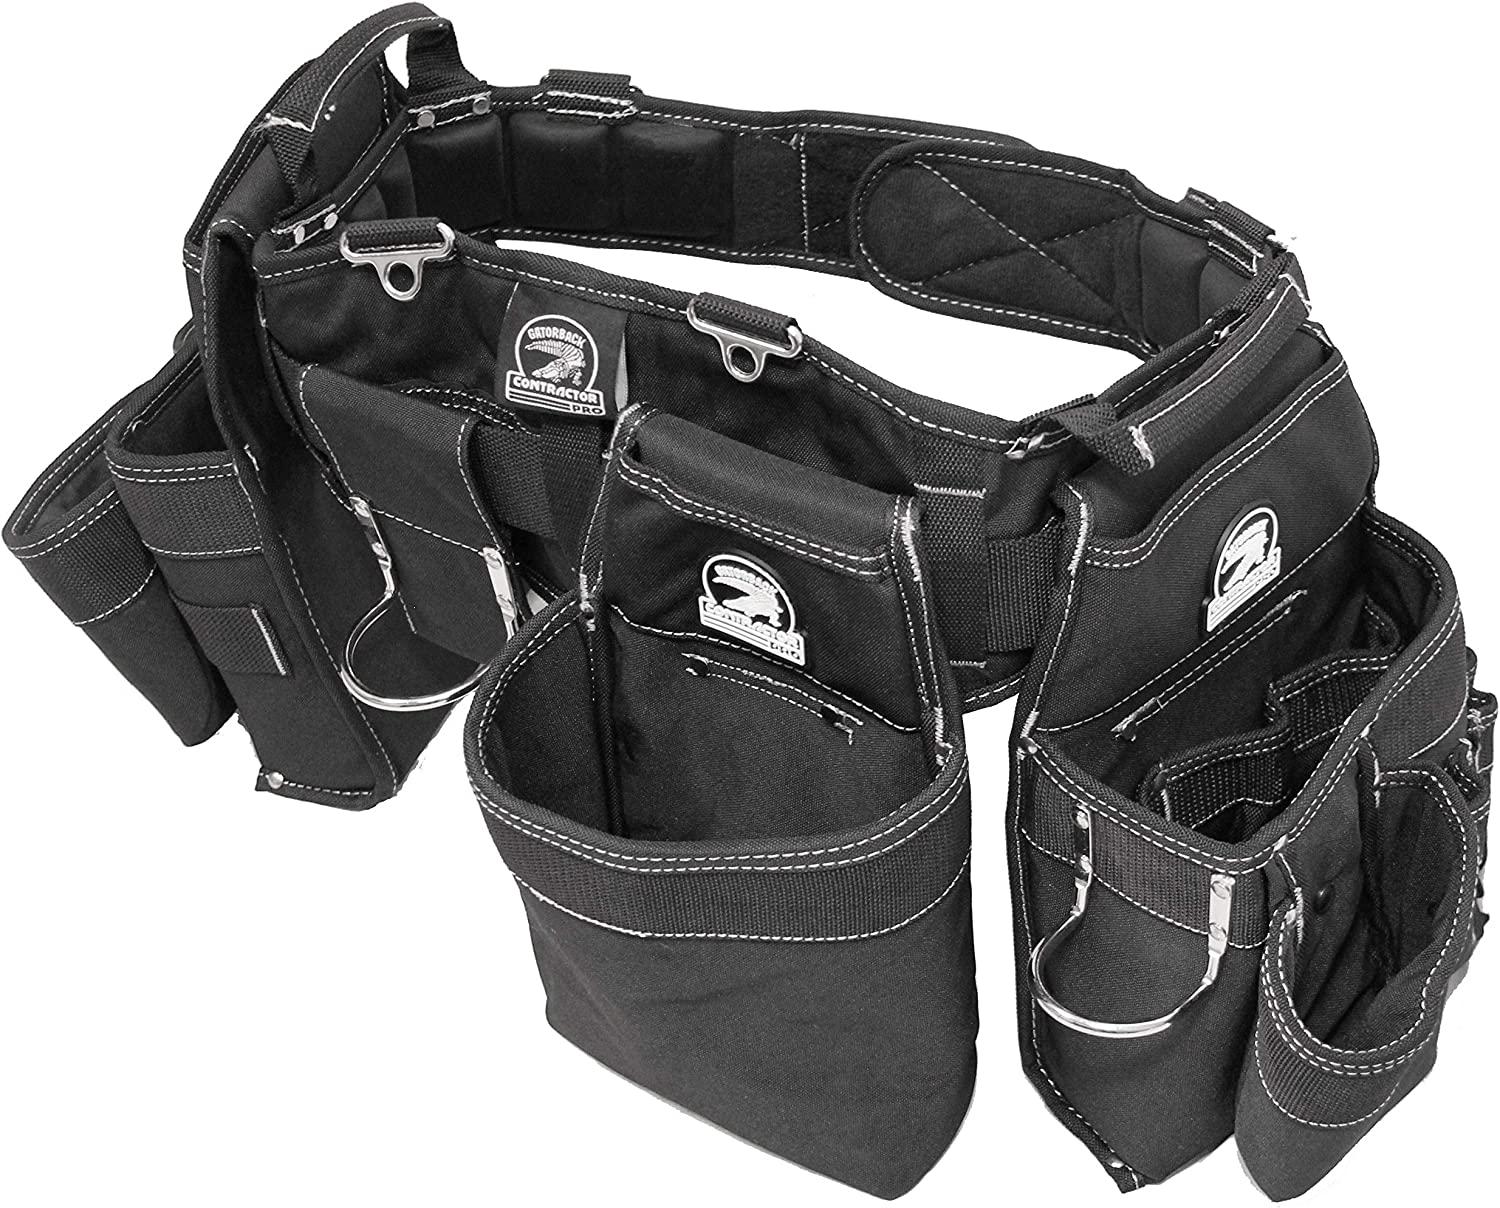 A black Gatorback B145 Carpenters Triple Combo Support Belt with Pro-Comfort Back Support and white details.